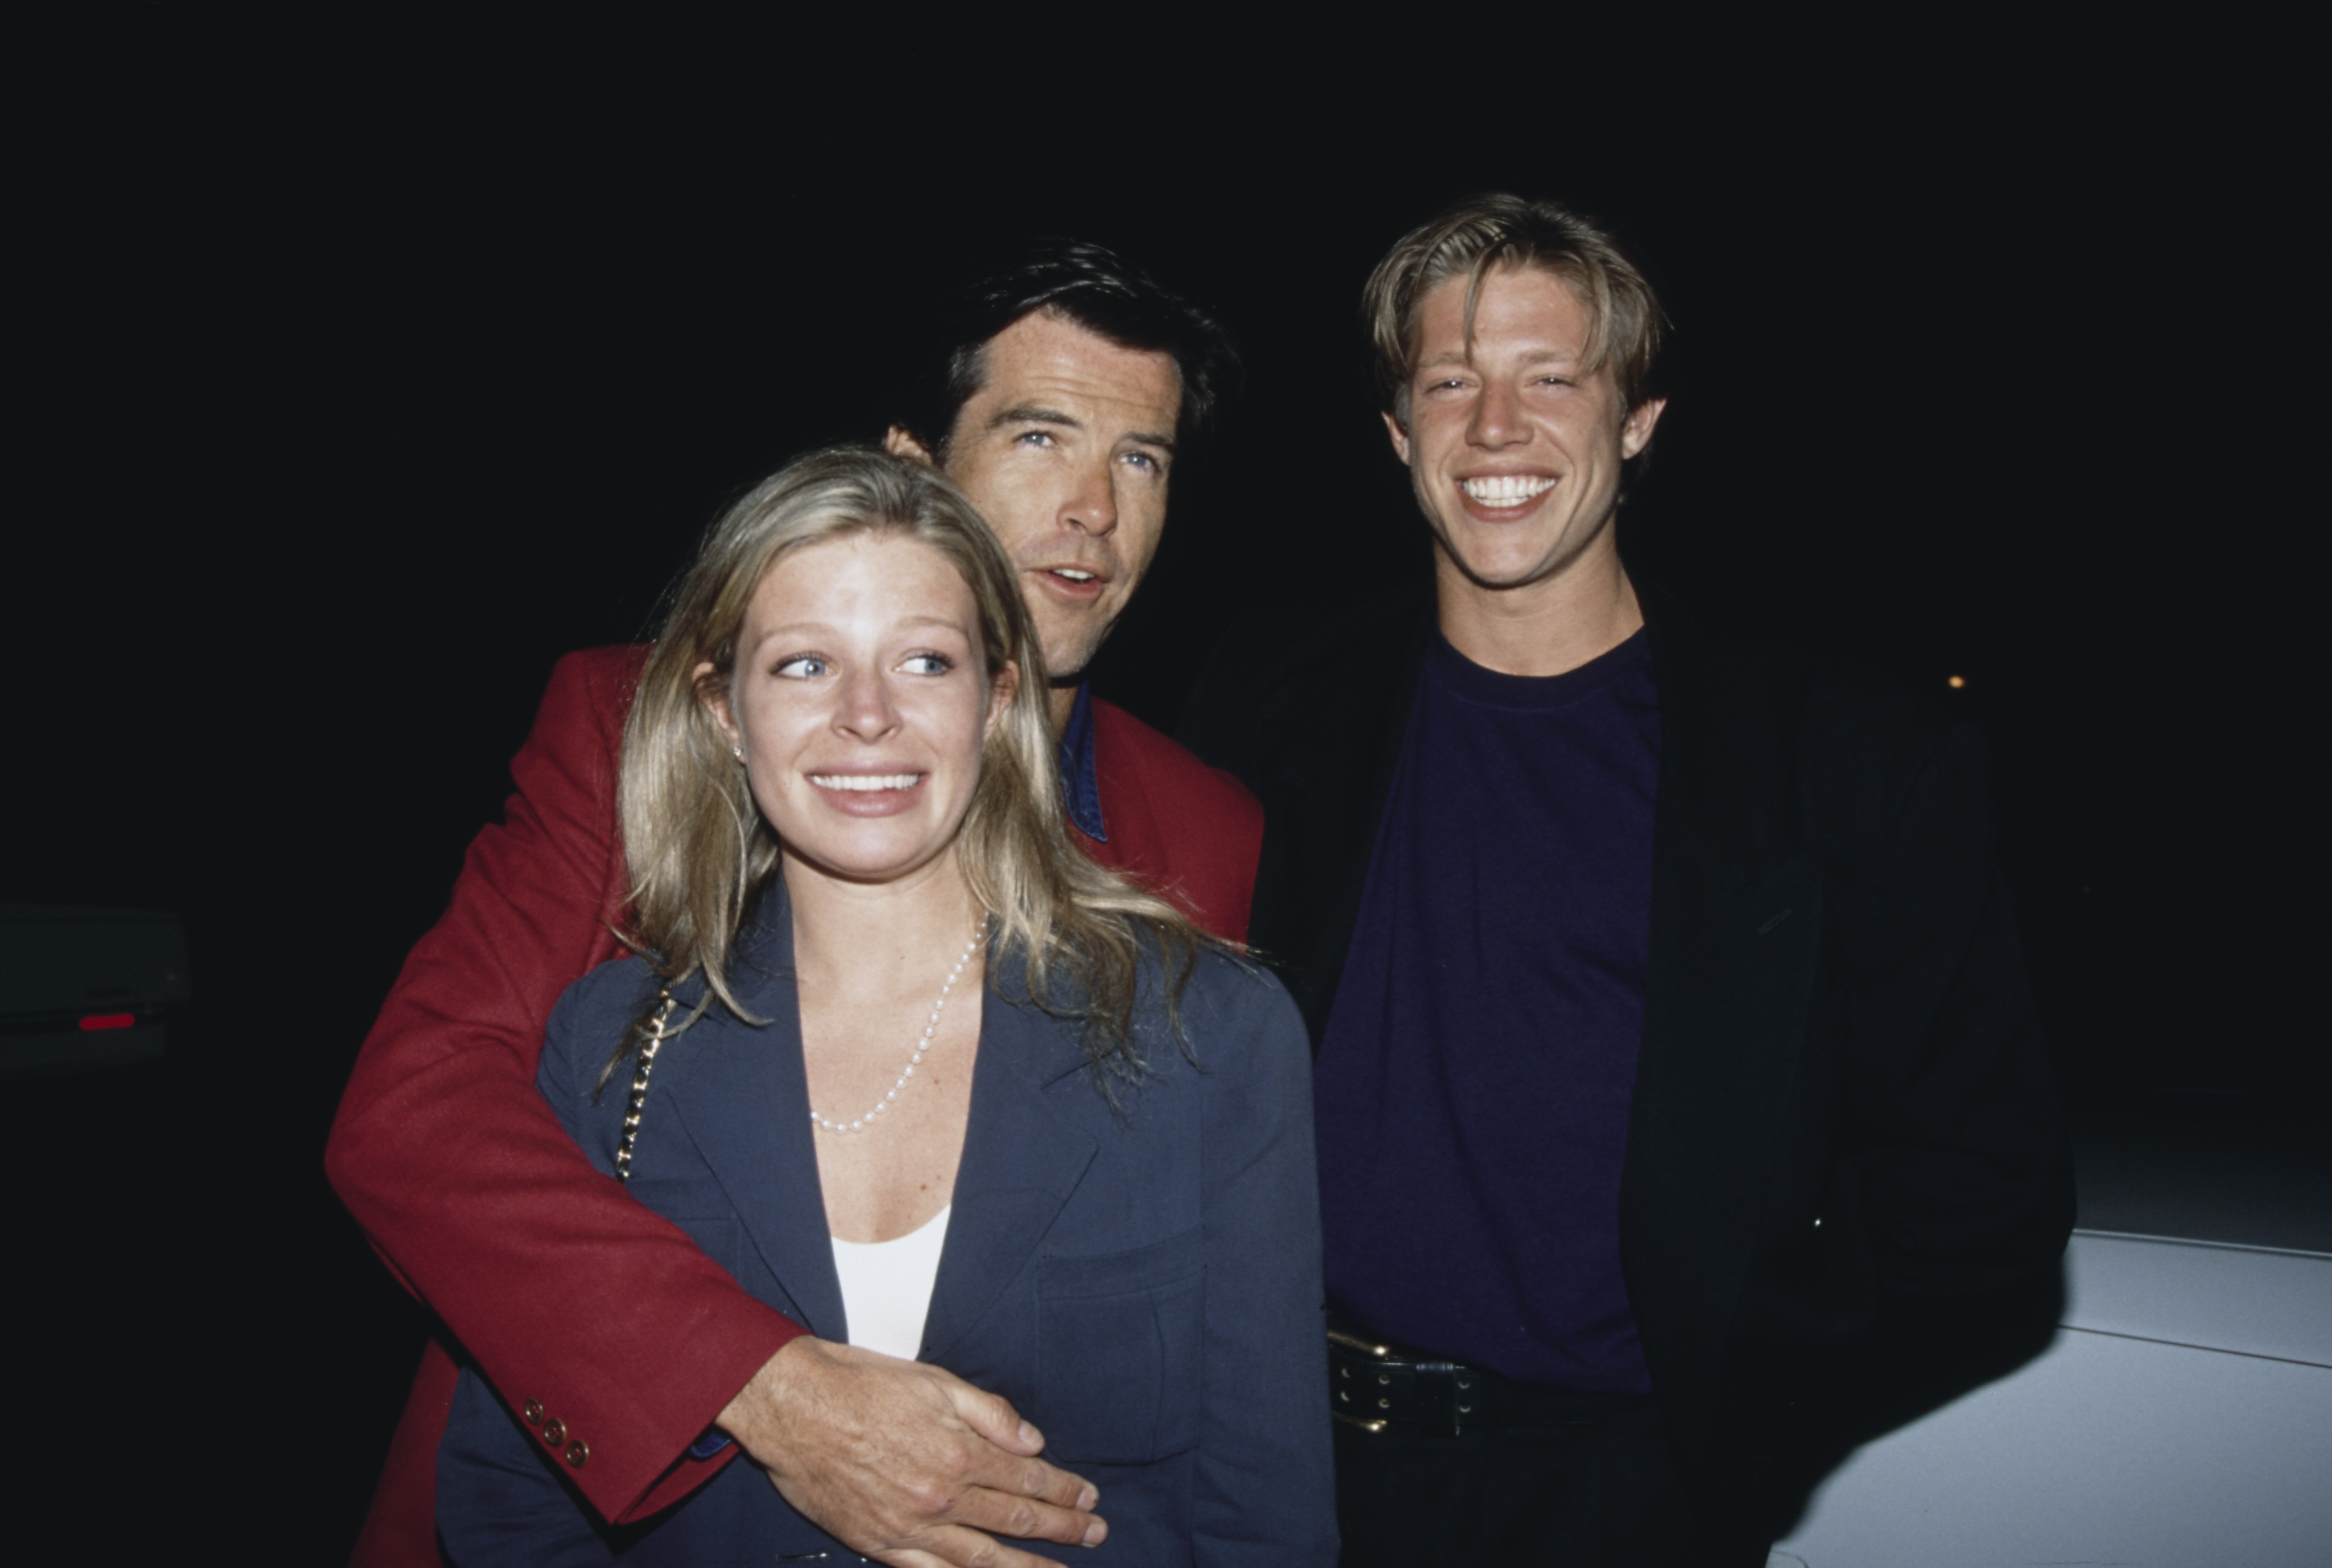 Irish actor Pierce Brosnan embraces his adopted daughter Charlotte Harris (1971-2013) alongside Harris's partner, American artist Alex Smith, at an after party, held at Spago in West Hollywood, California, 8th May 1993. | Source: Getty Images